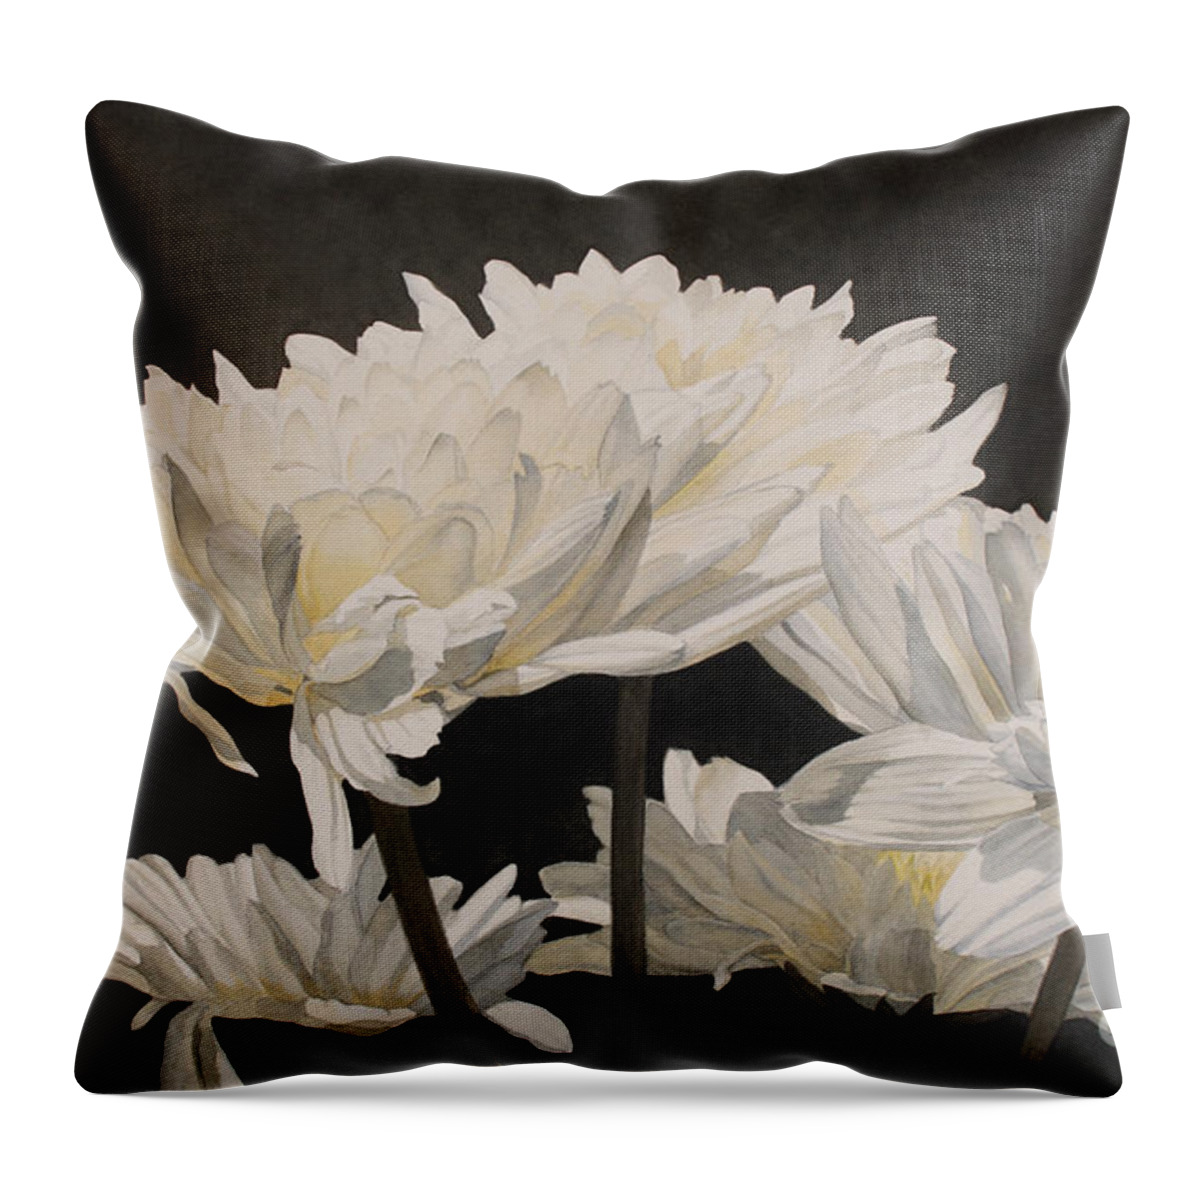 Flowers Throw Pillow featuring the painting Rejoicing by Jan Lawnikanis